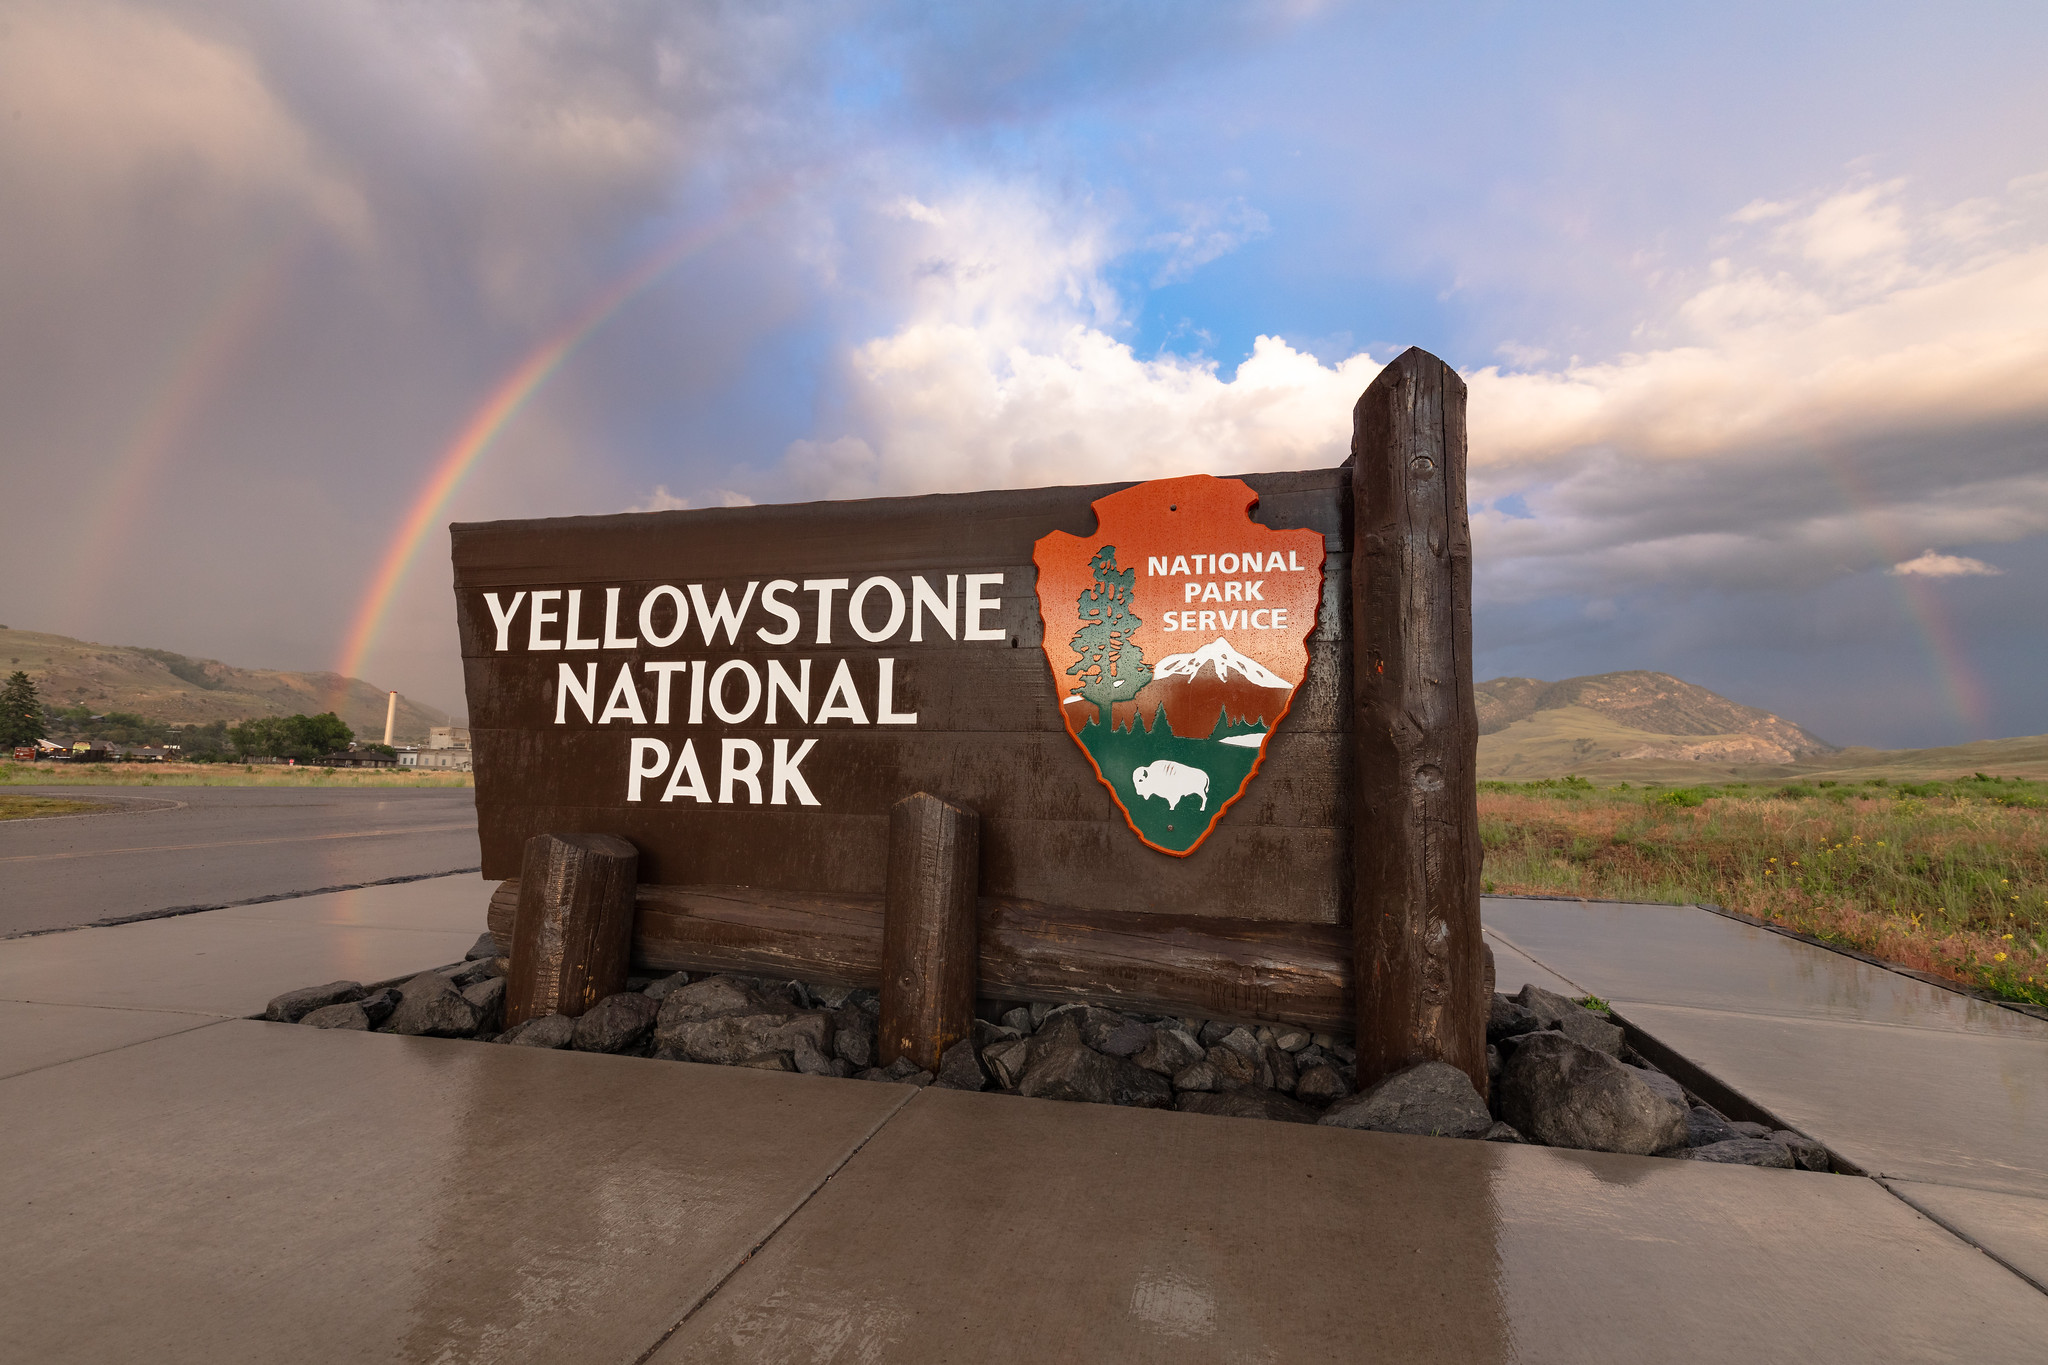 sign that reads "Yellowstone National Park" under a double rainbow